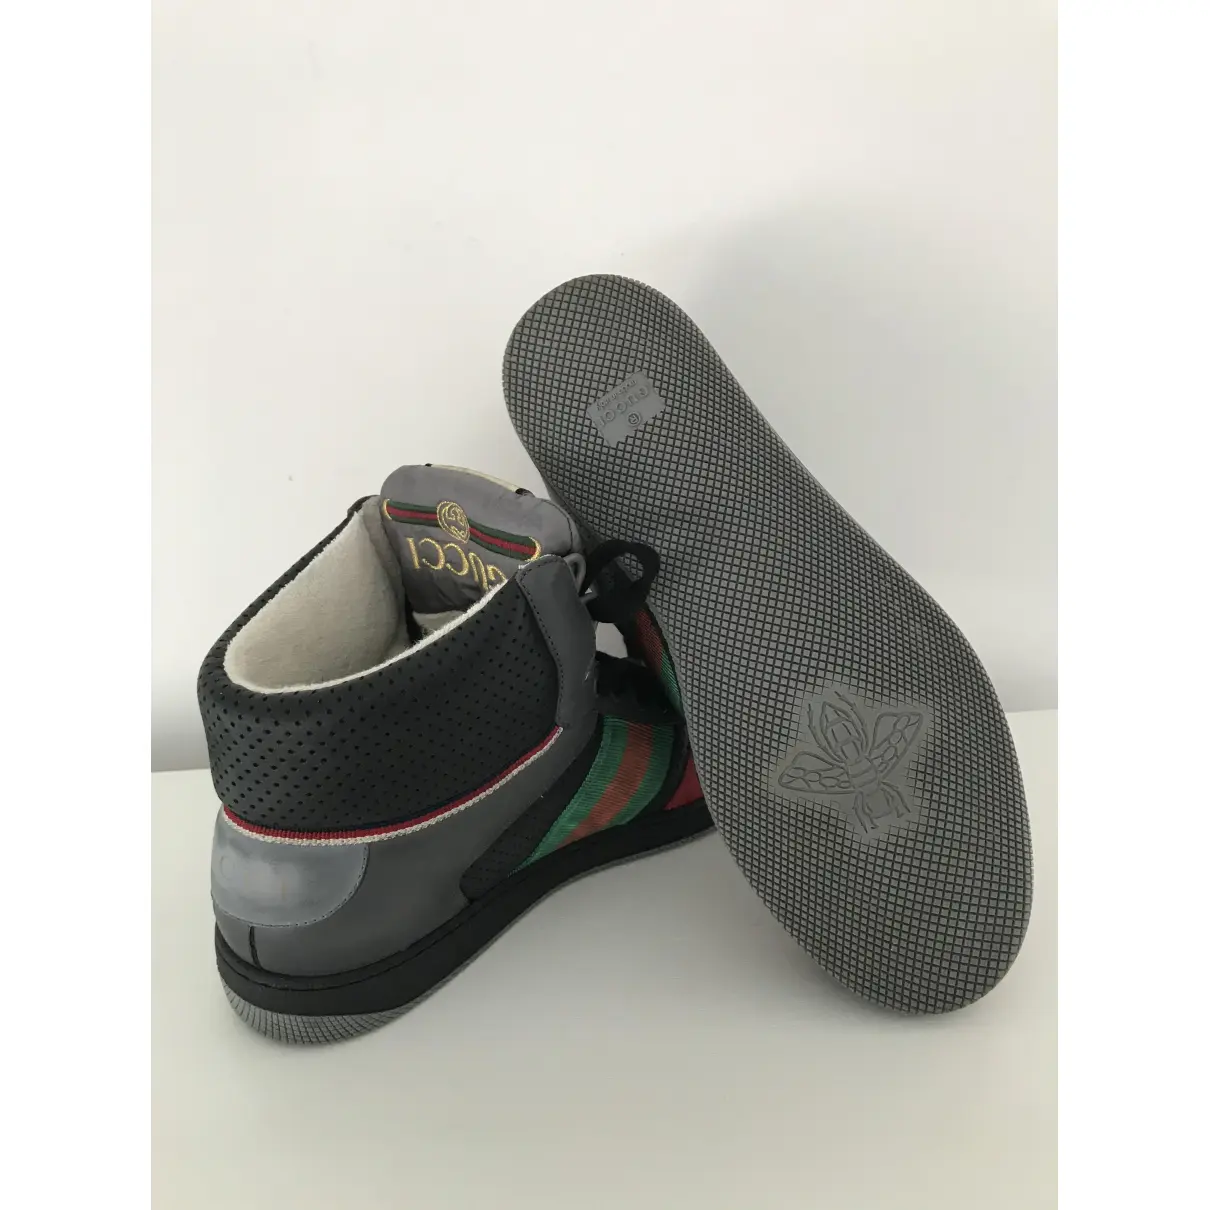 Screener leather high trainers Gucci